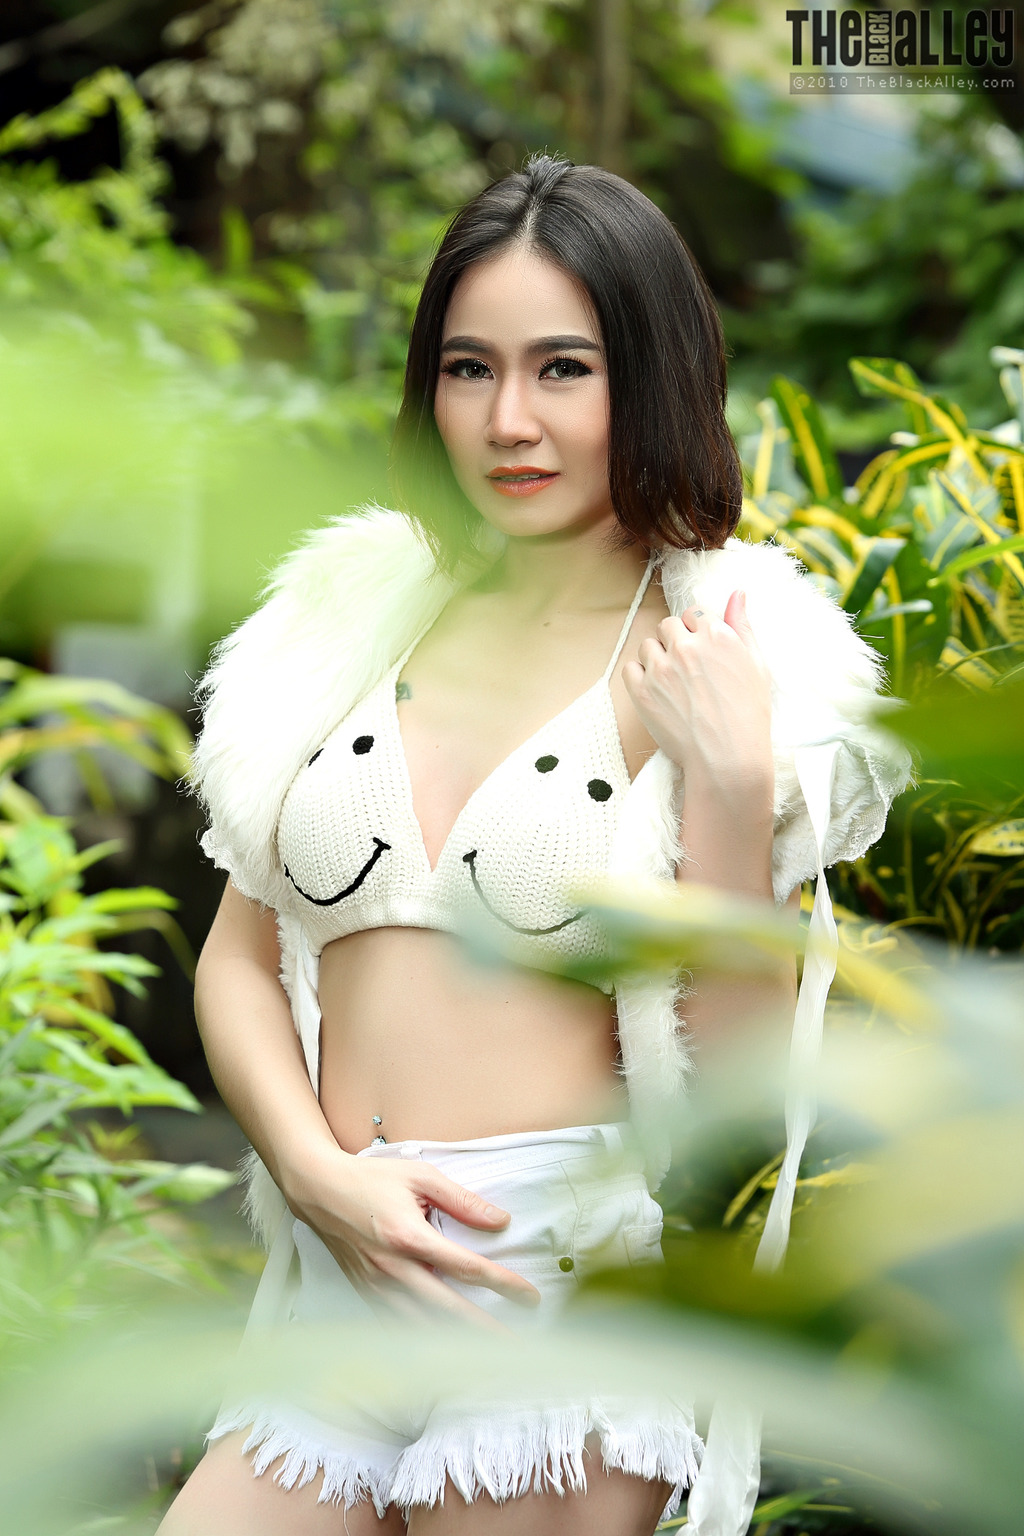 PHOTO Busty Asian Strips Outdoors. 